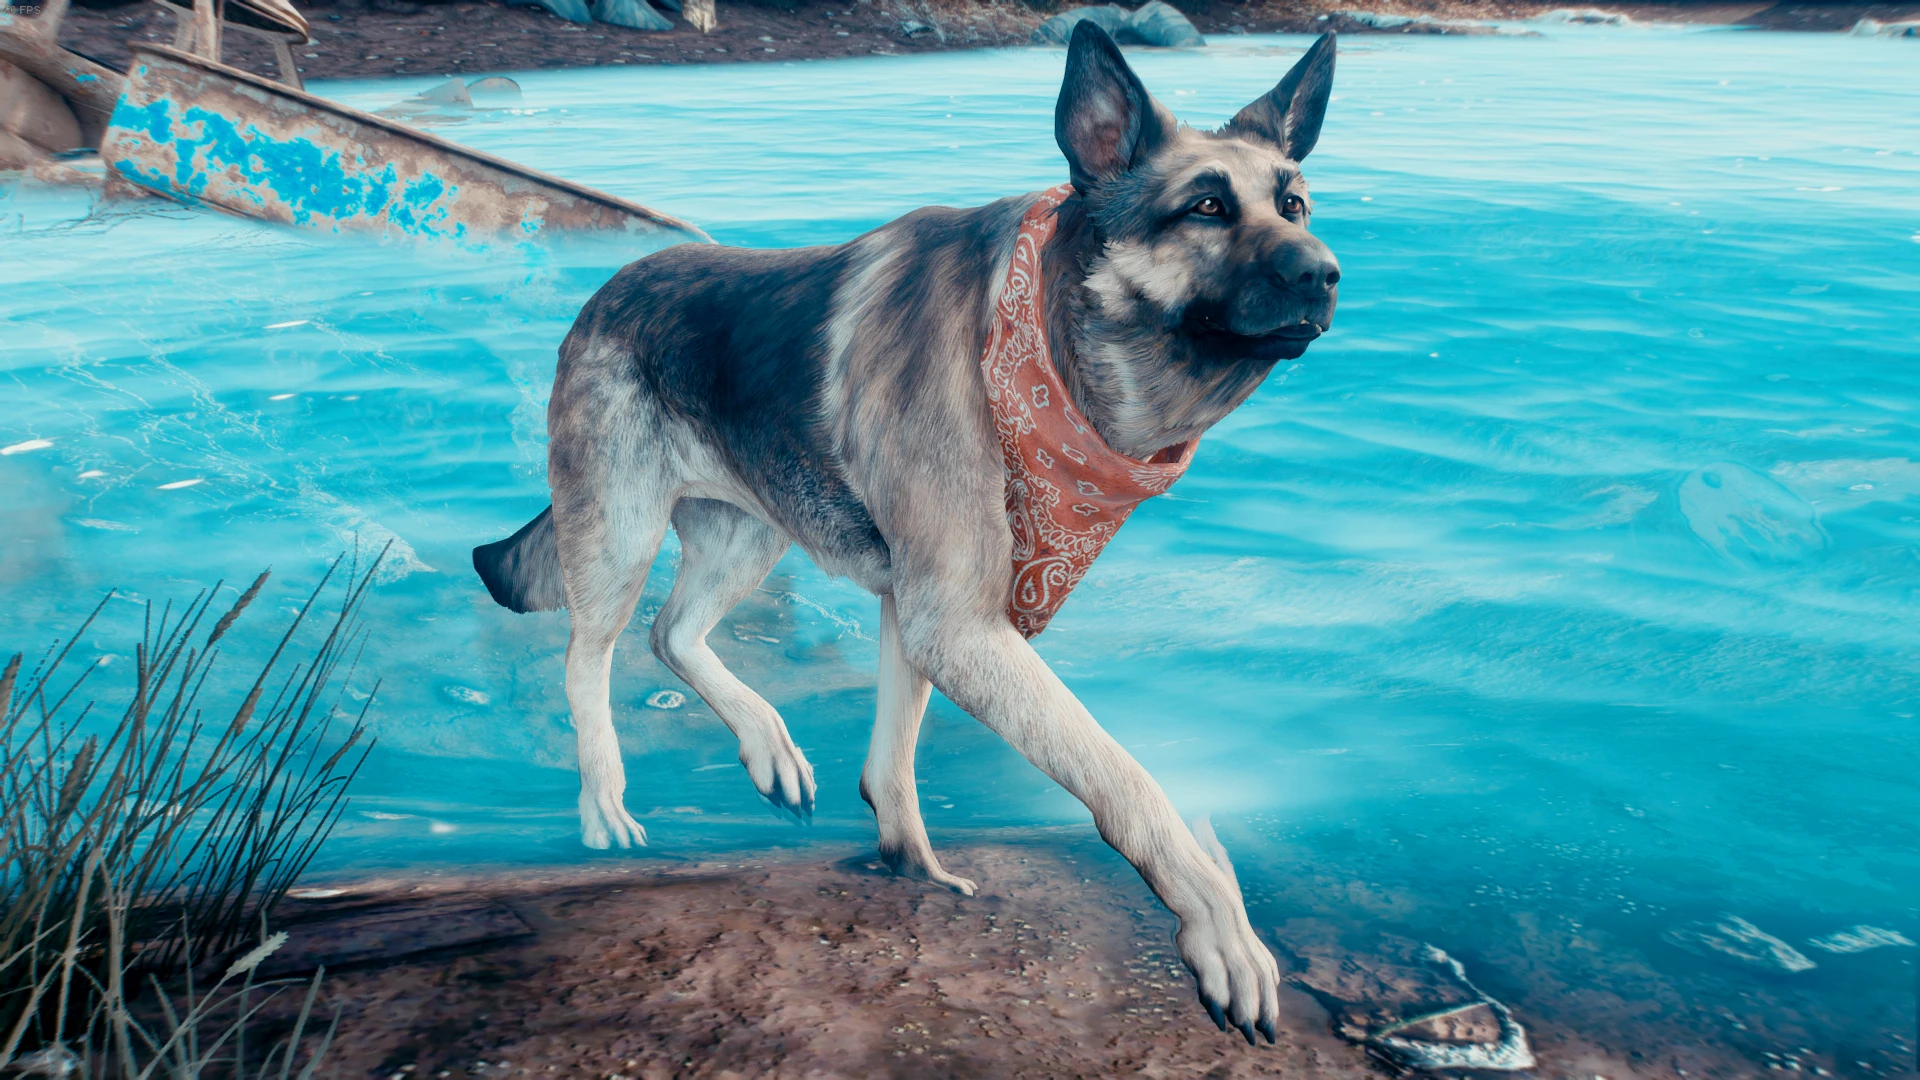 fallout 4 dogmeat and another companion mod